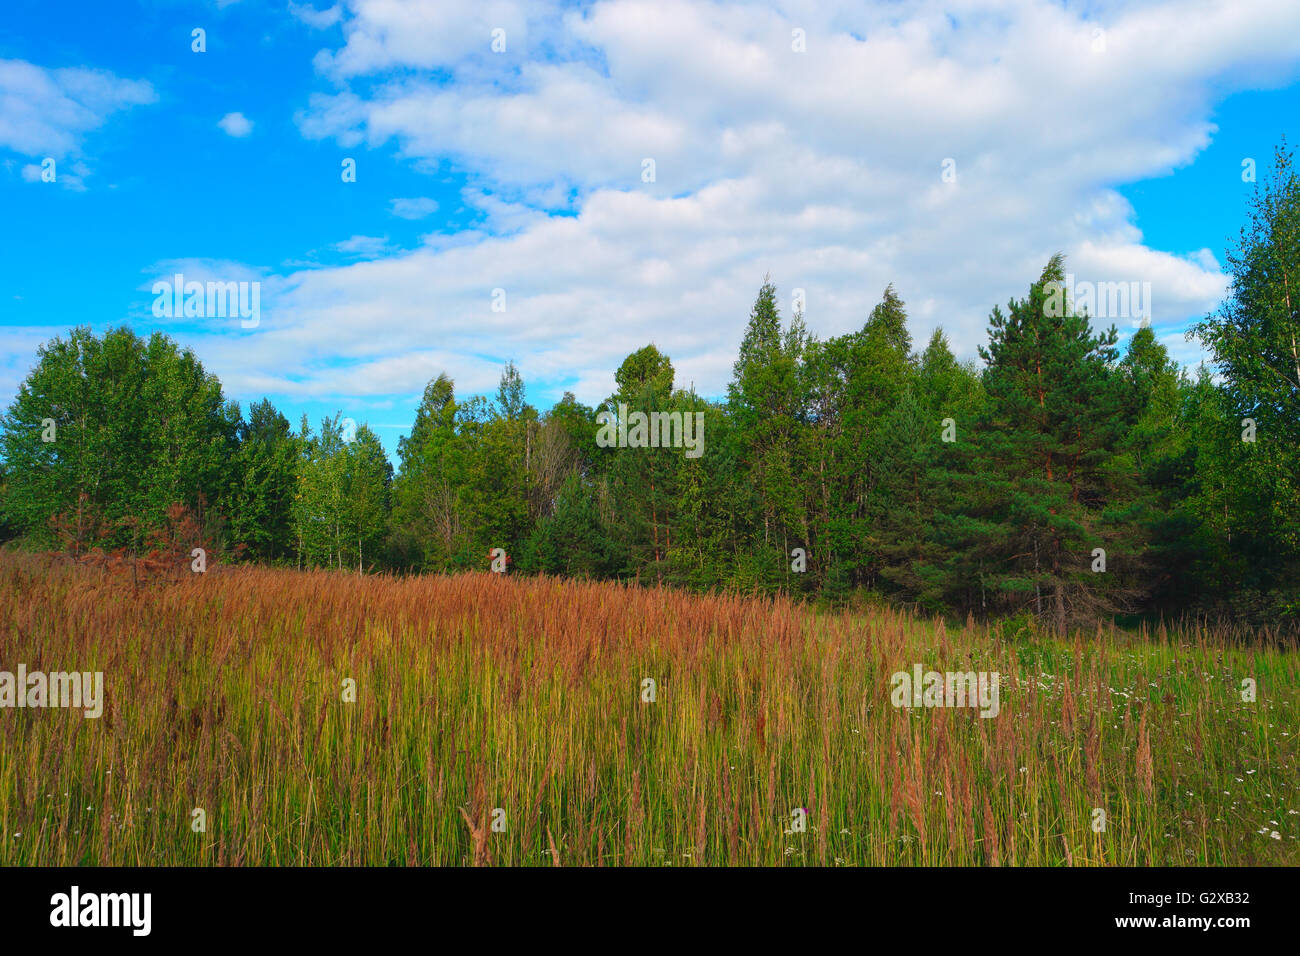 Summer landscape with grass, forest, sky and clouds Stock Photo